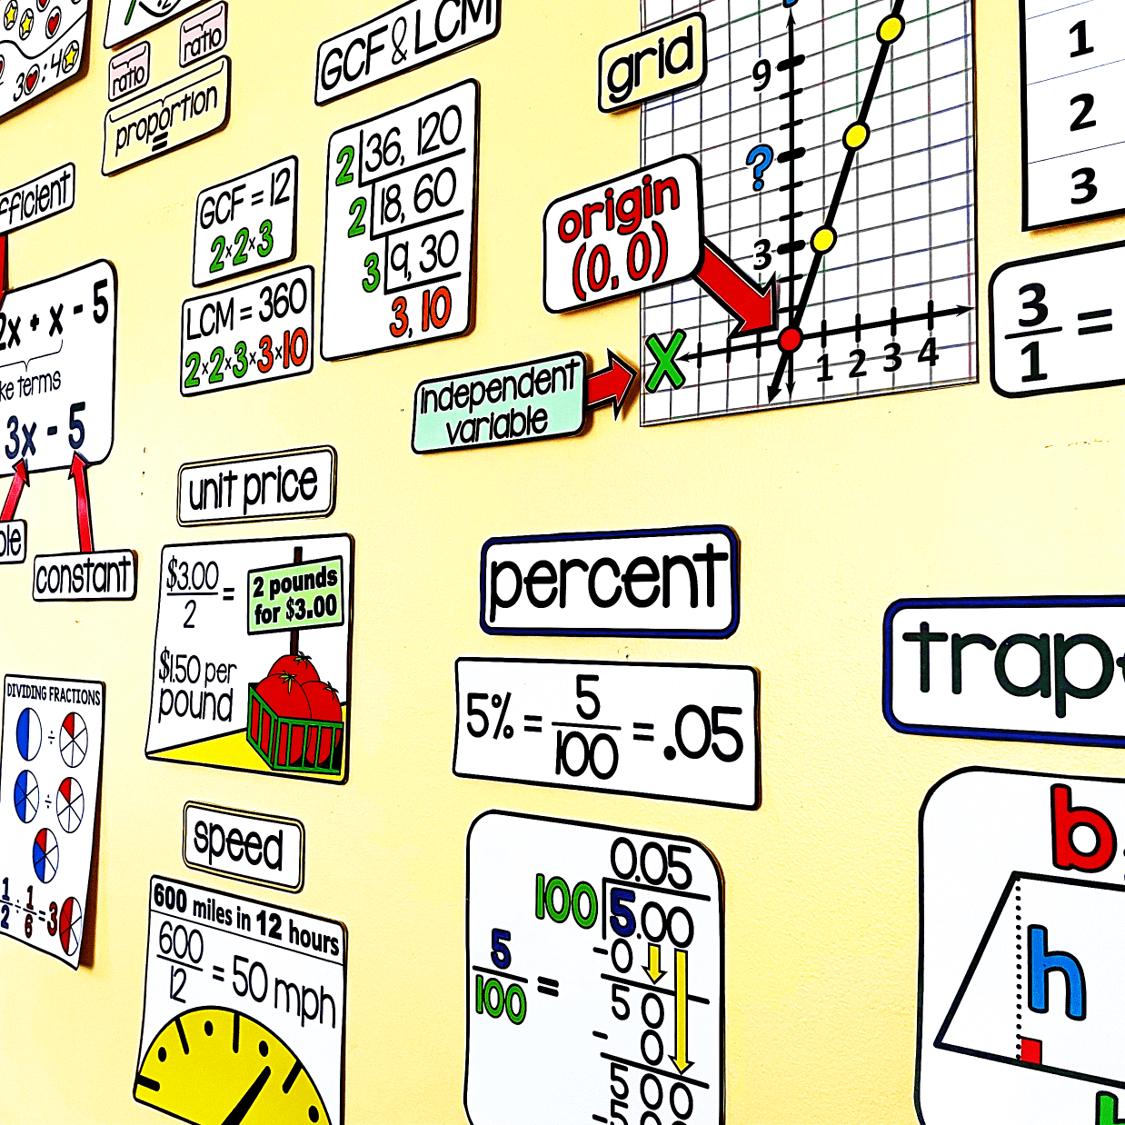 Scaffolded Math and Science: 5 Ways Math Word Walls Have Changed My Teaching